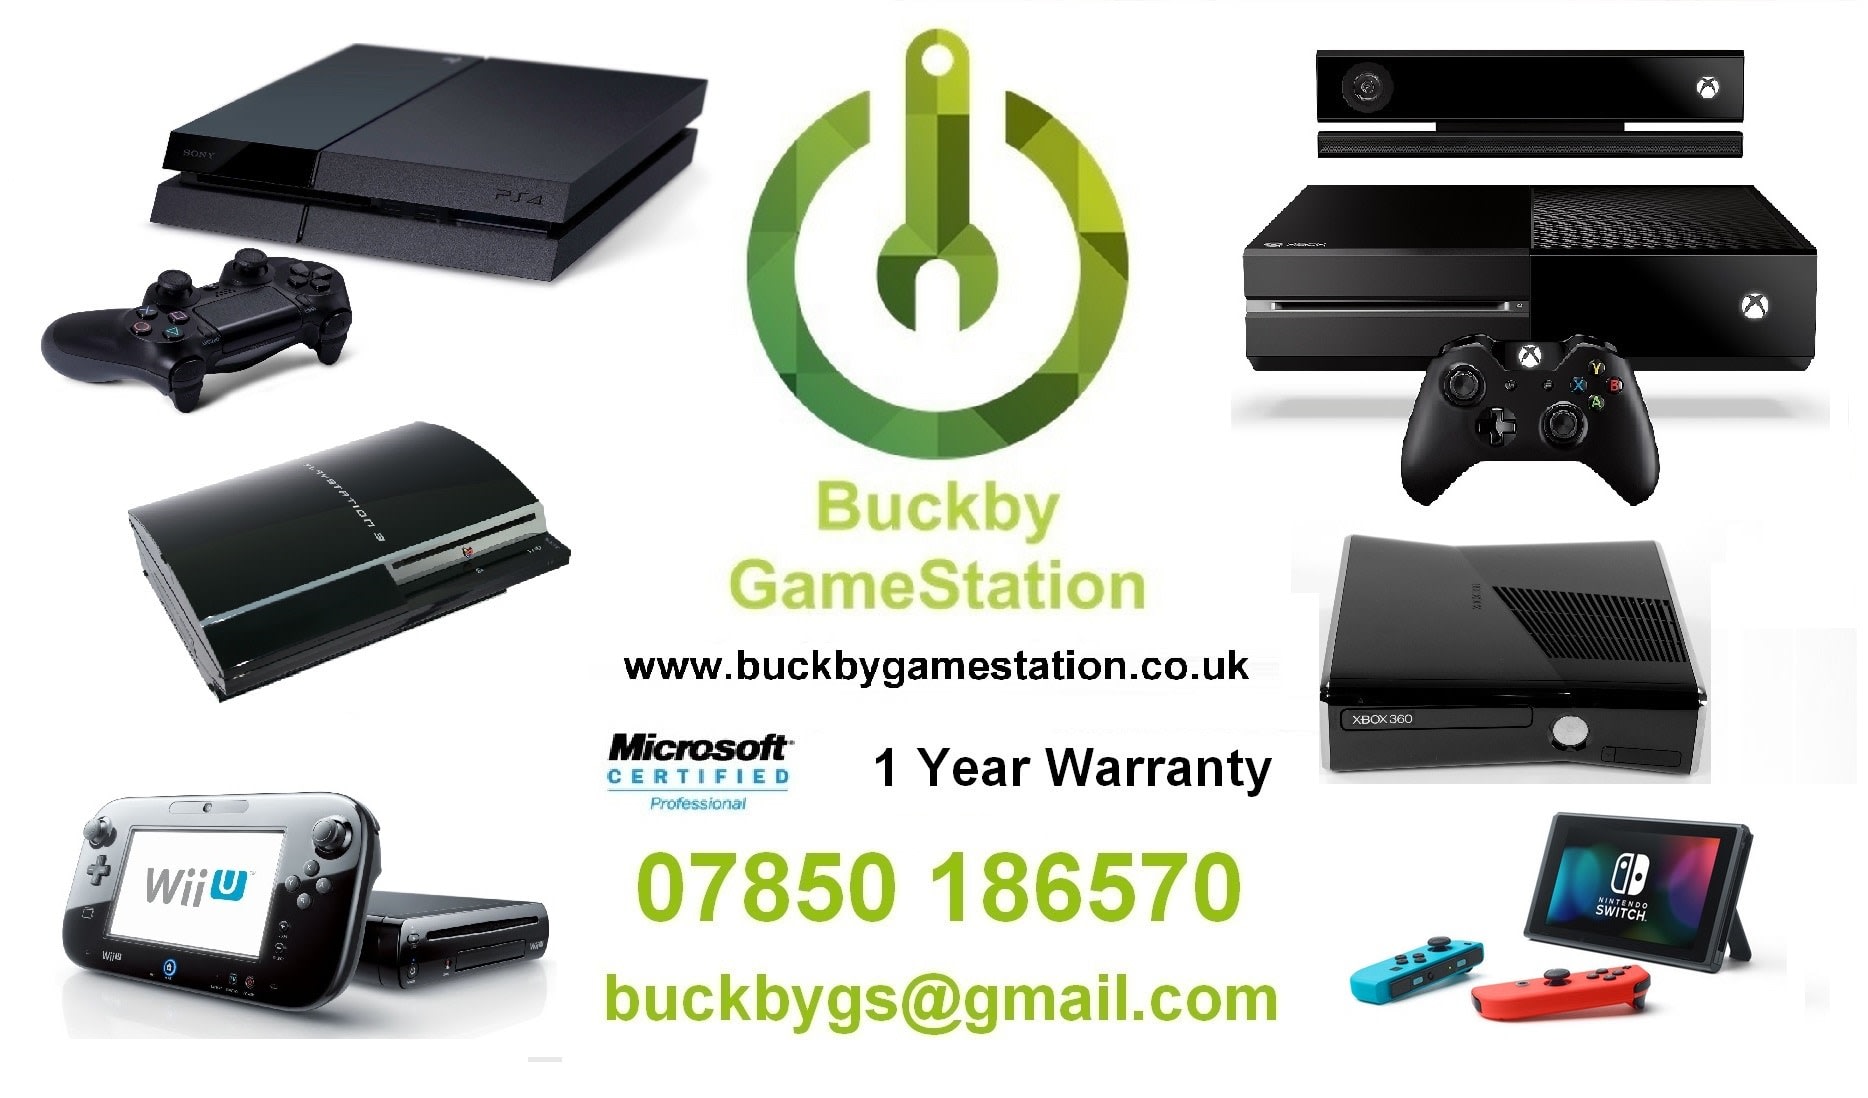 Images Buckby GameStation